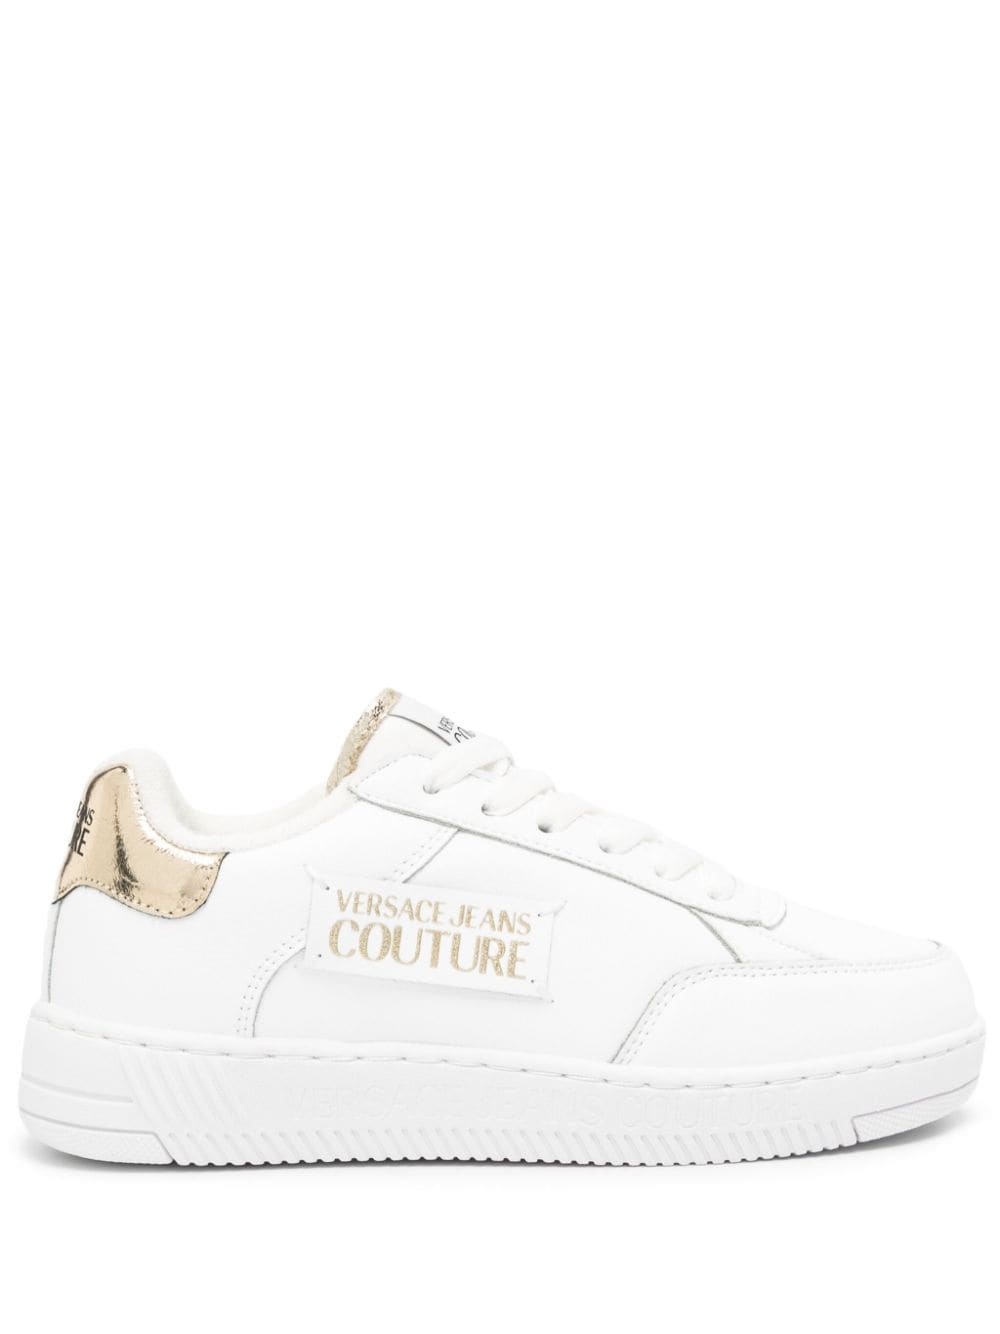 Versace Jeans Couture Meyssa Leather Sneakers In White